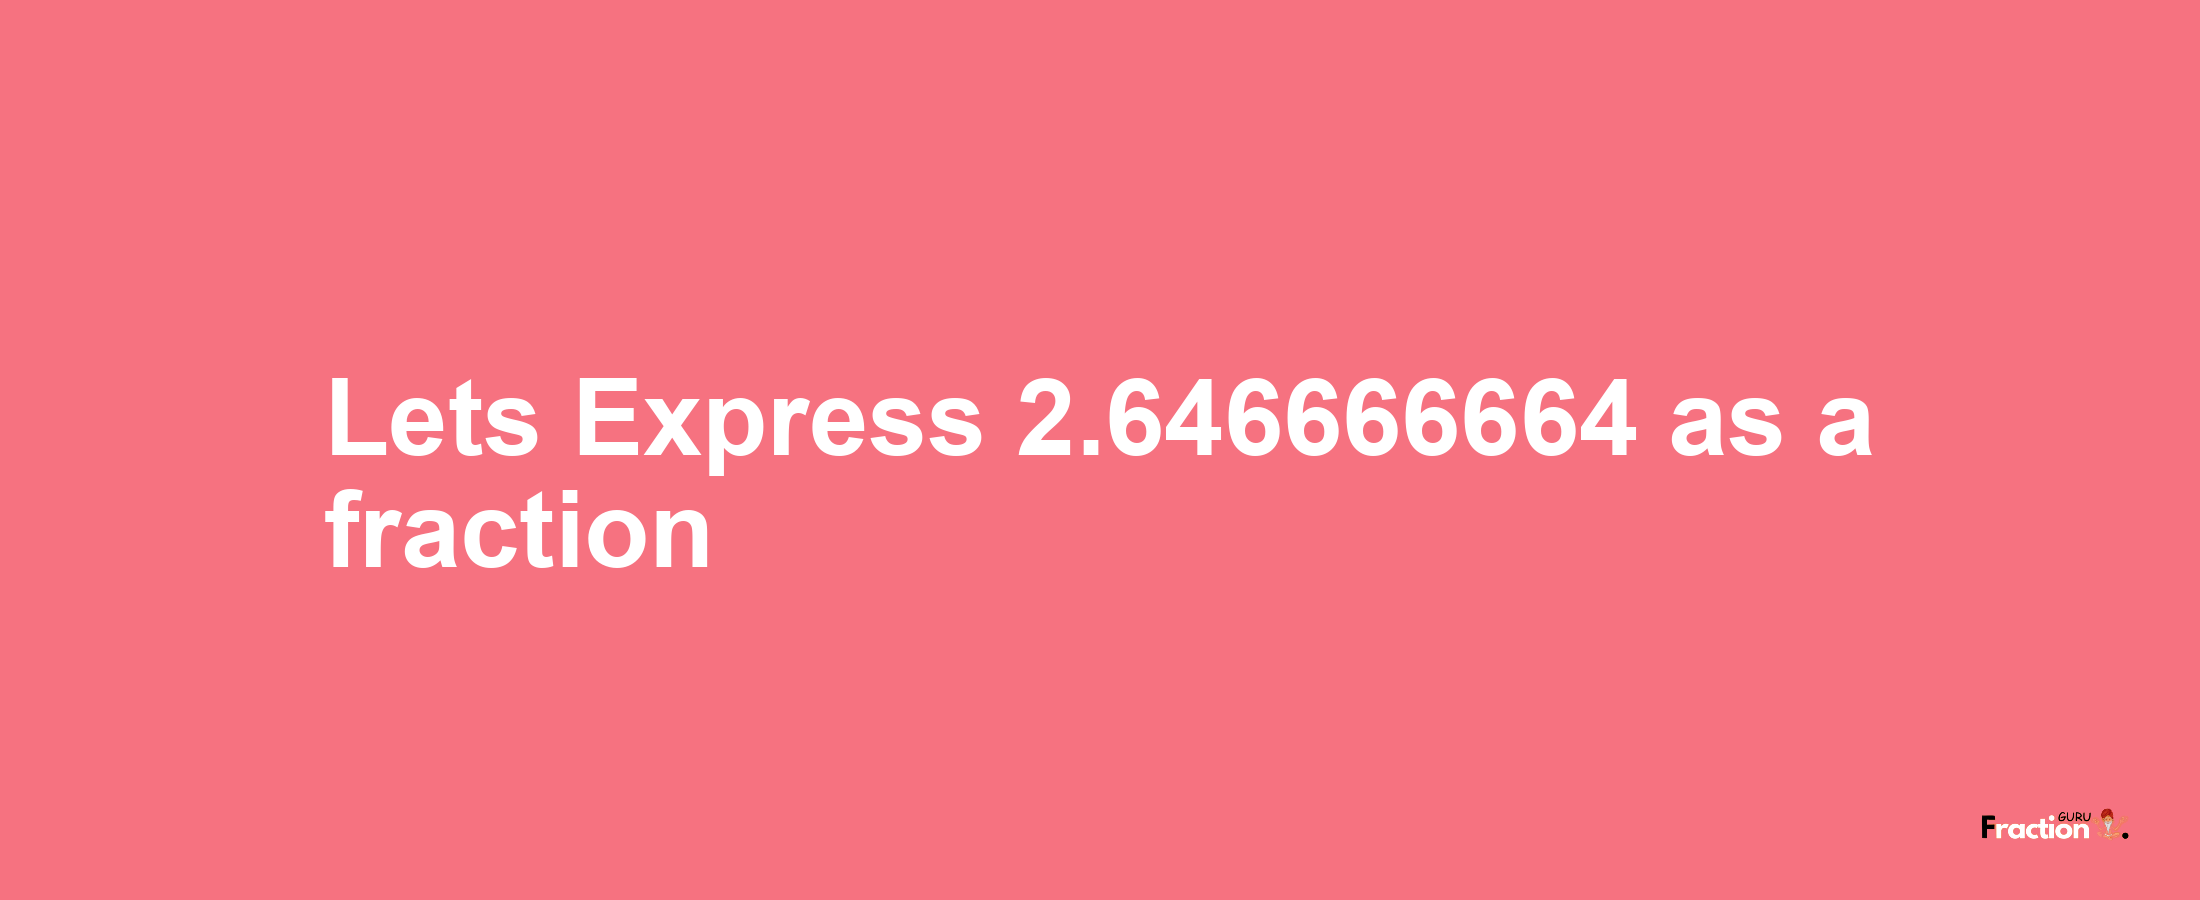 Lets Express 2.646666664 as afraction